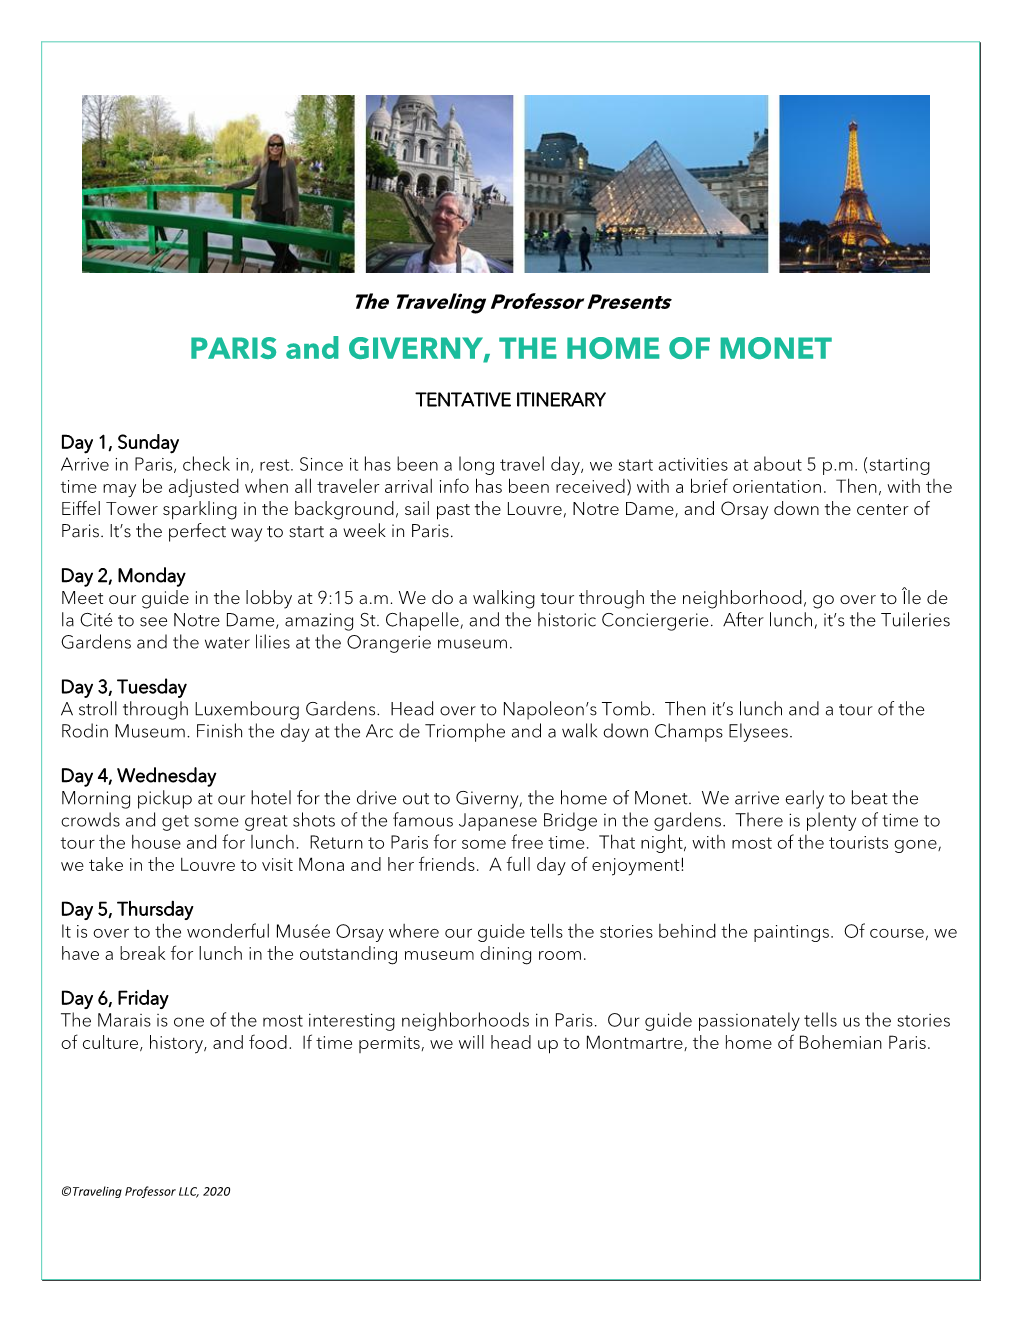 PARIS and GIVERNY, the HOME of MONET